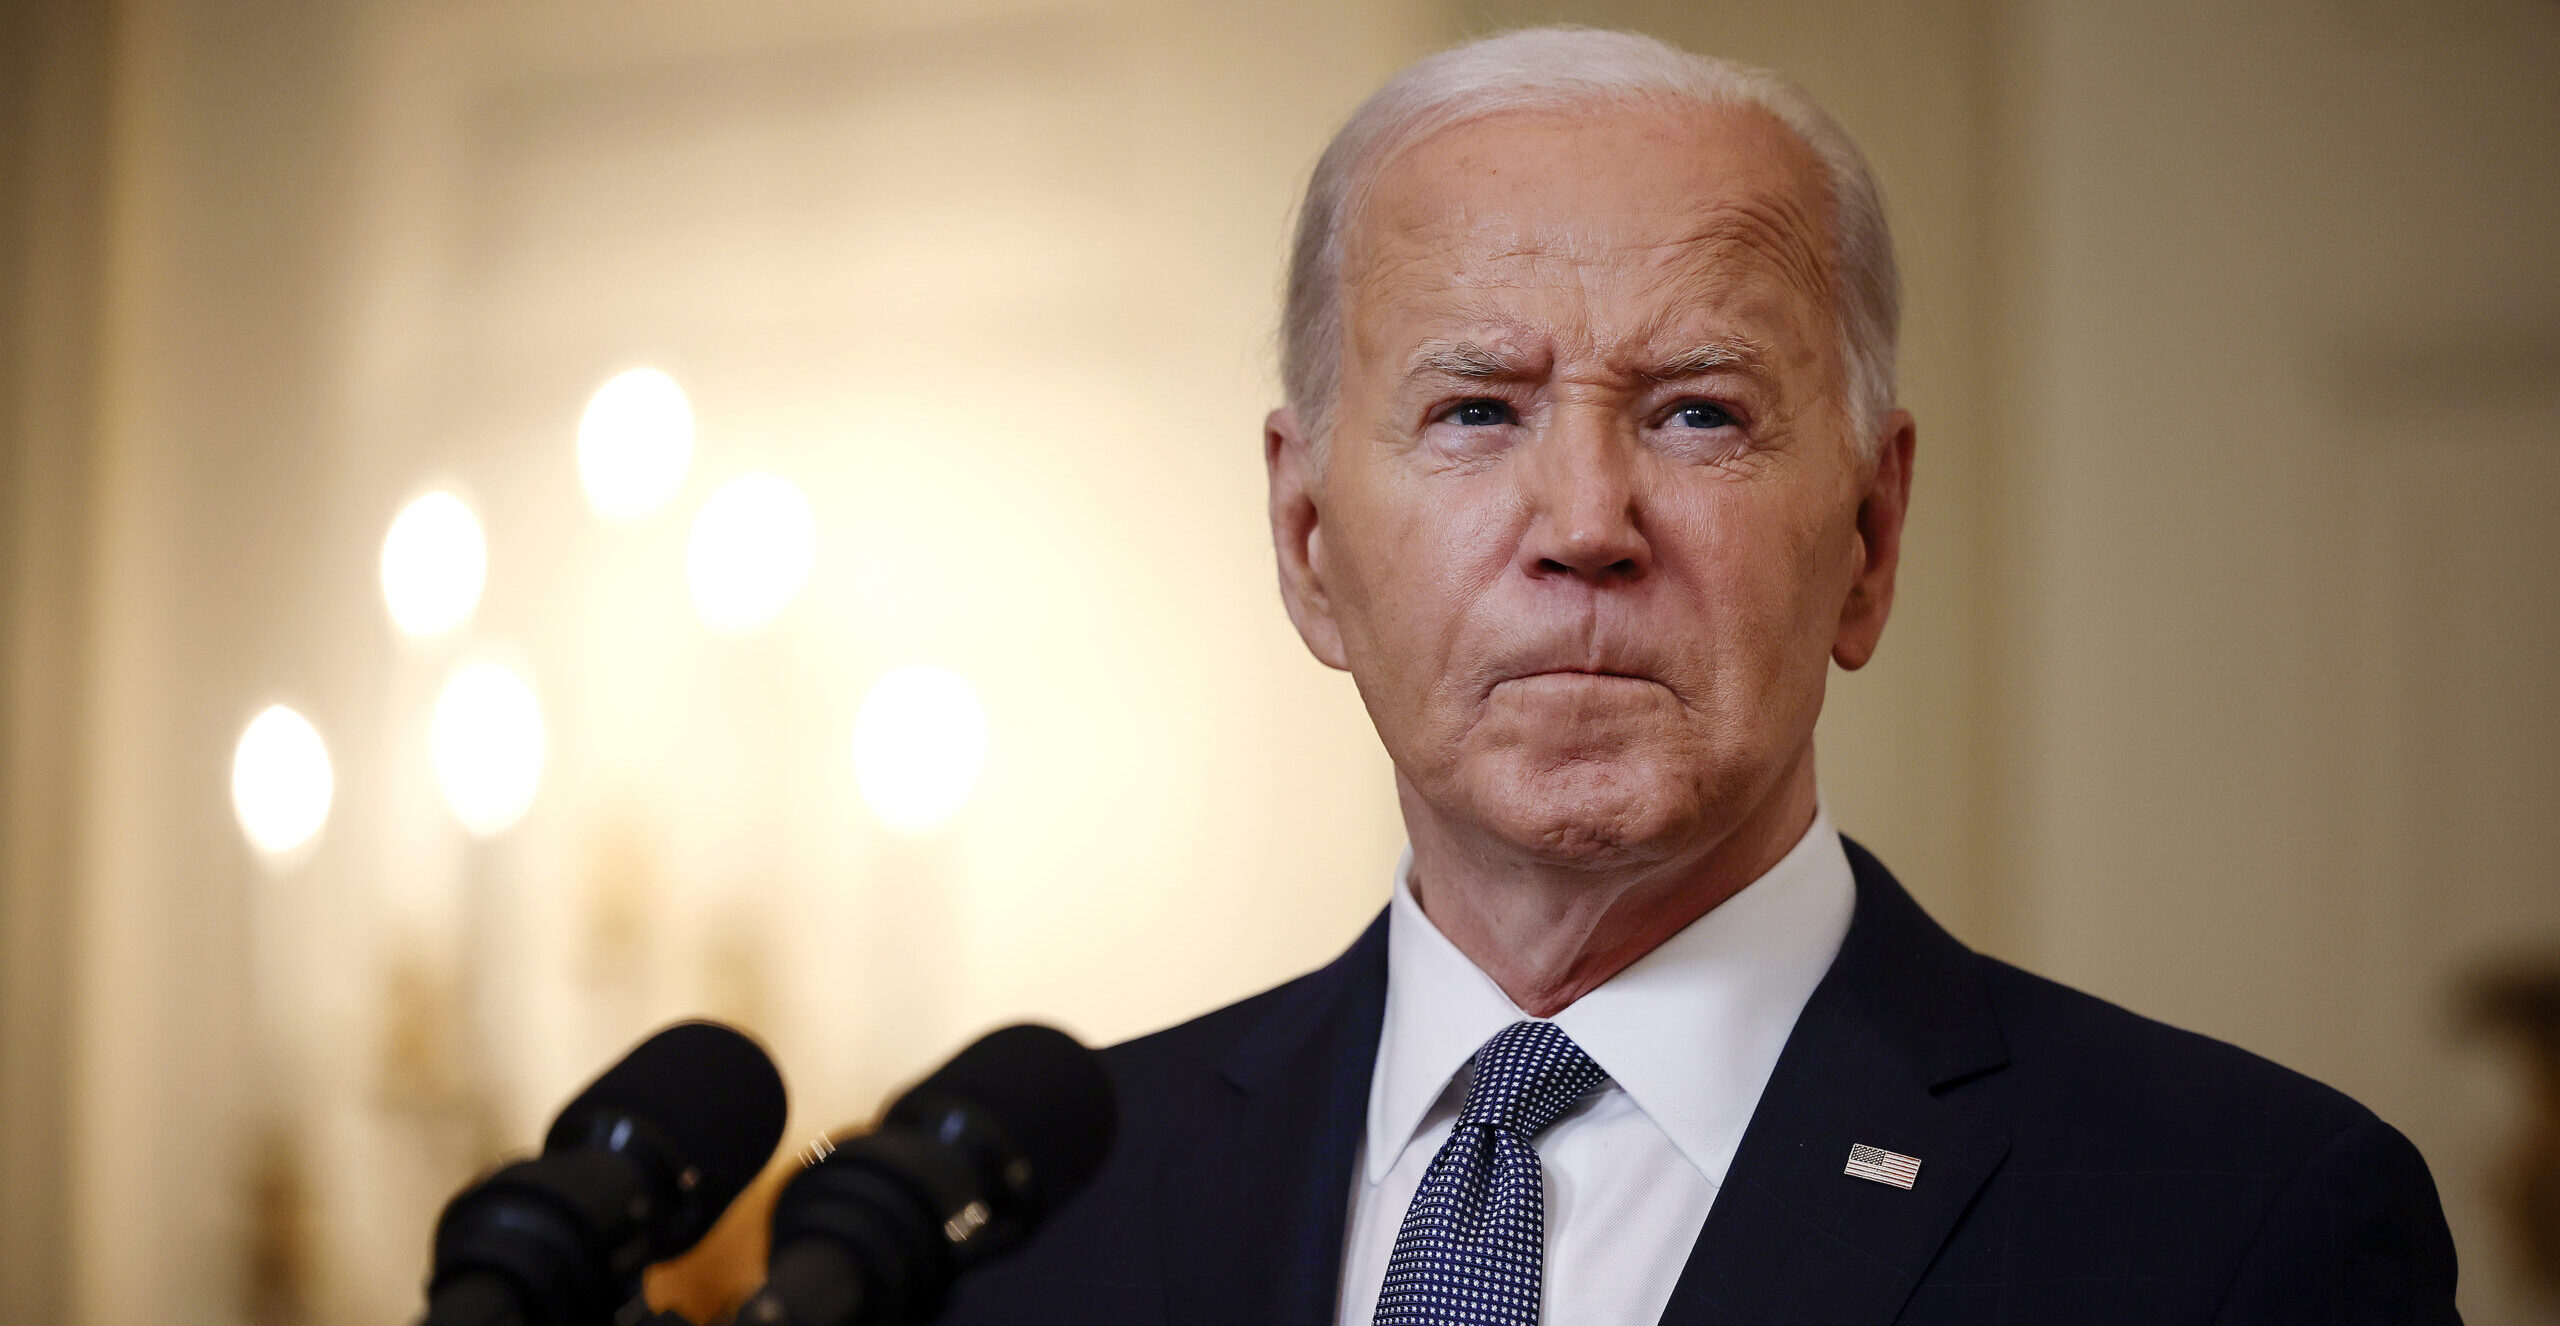 Biden's Hypocrisy on Climate Change Painfully Obvious